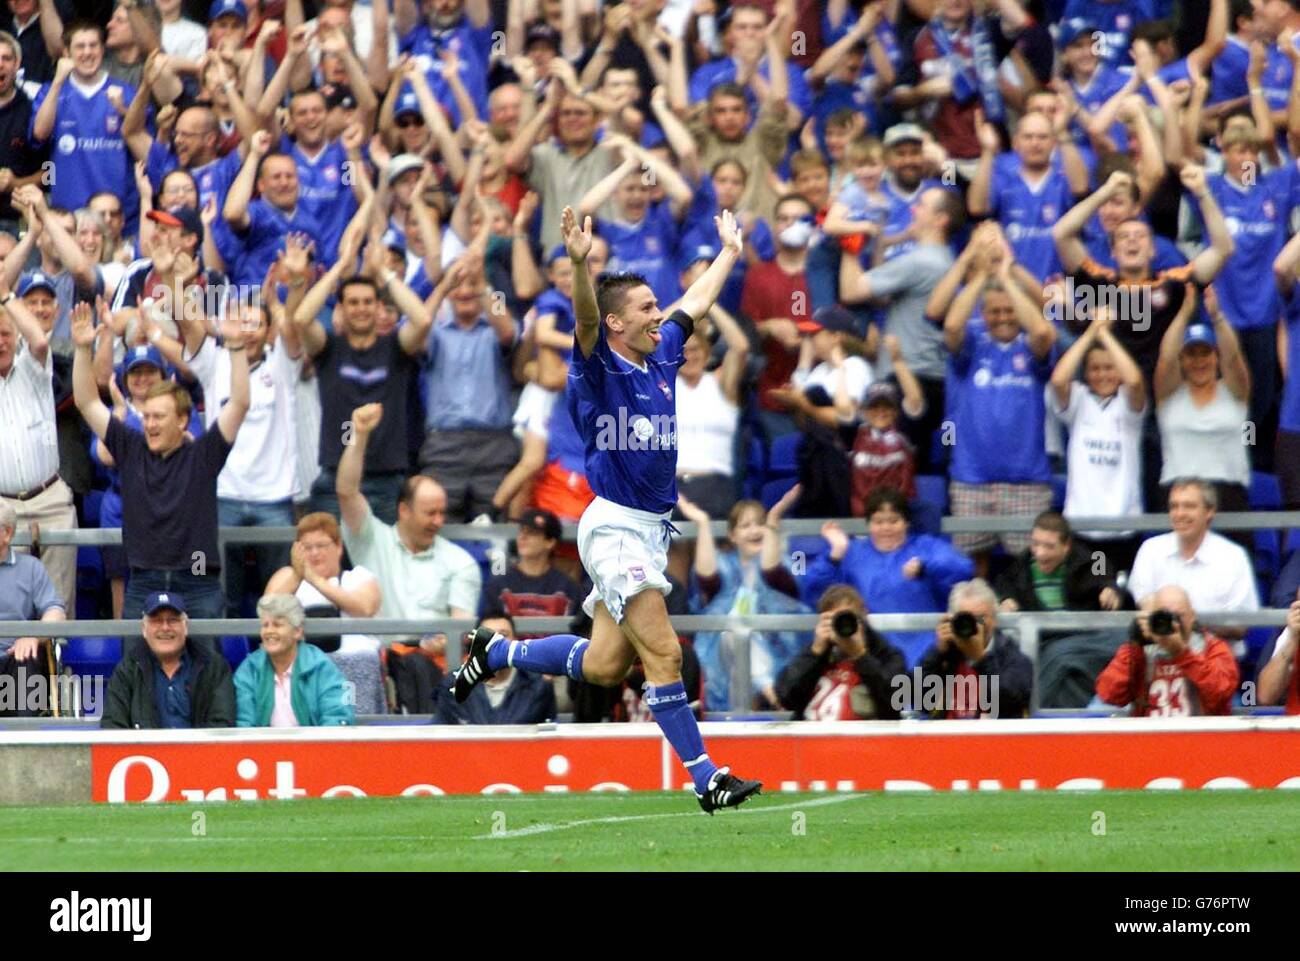 Matt Holland, Ipswich captain, celebrates scoring the first Ipswich goal during the Nationwide Division One match vs Leicester at Portman Road, Ipswich. NO UNOFFICIAL CLUB WEBSITE USE. Stock Photo